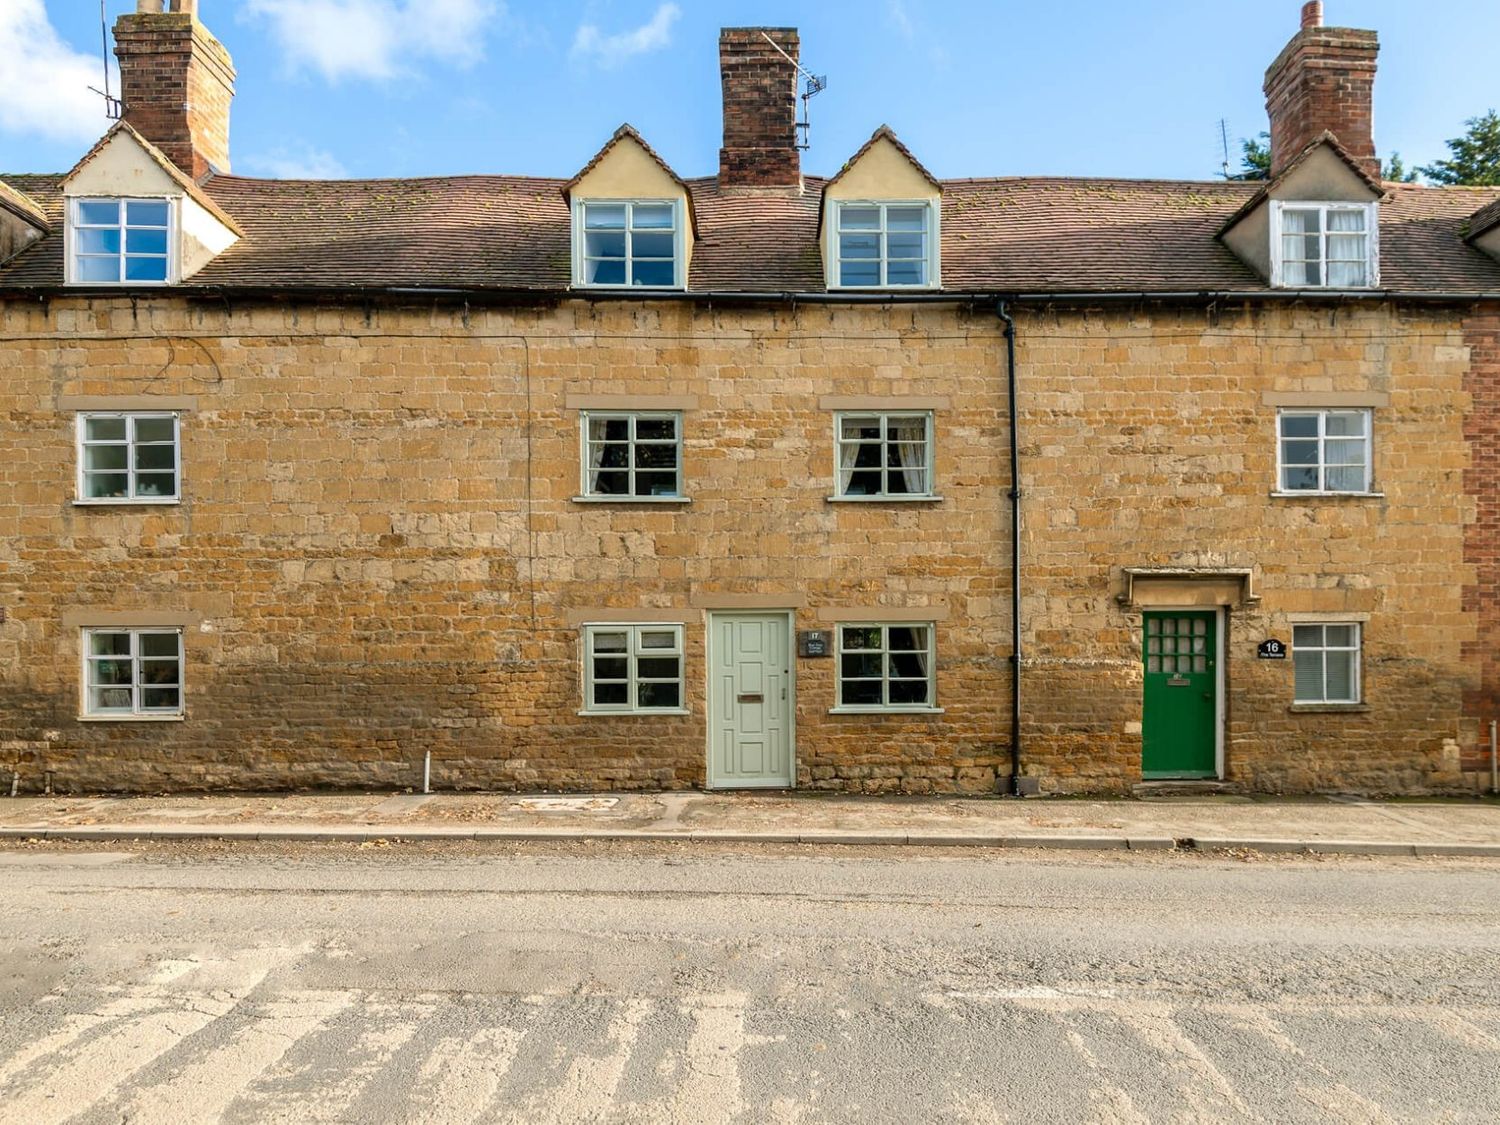 Pear Tree Cottage (Mickleton) - Cotswolds - 1091420 - photo 1